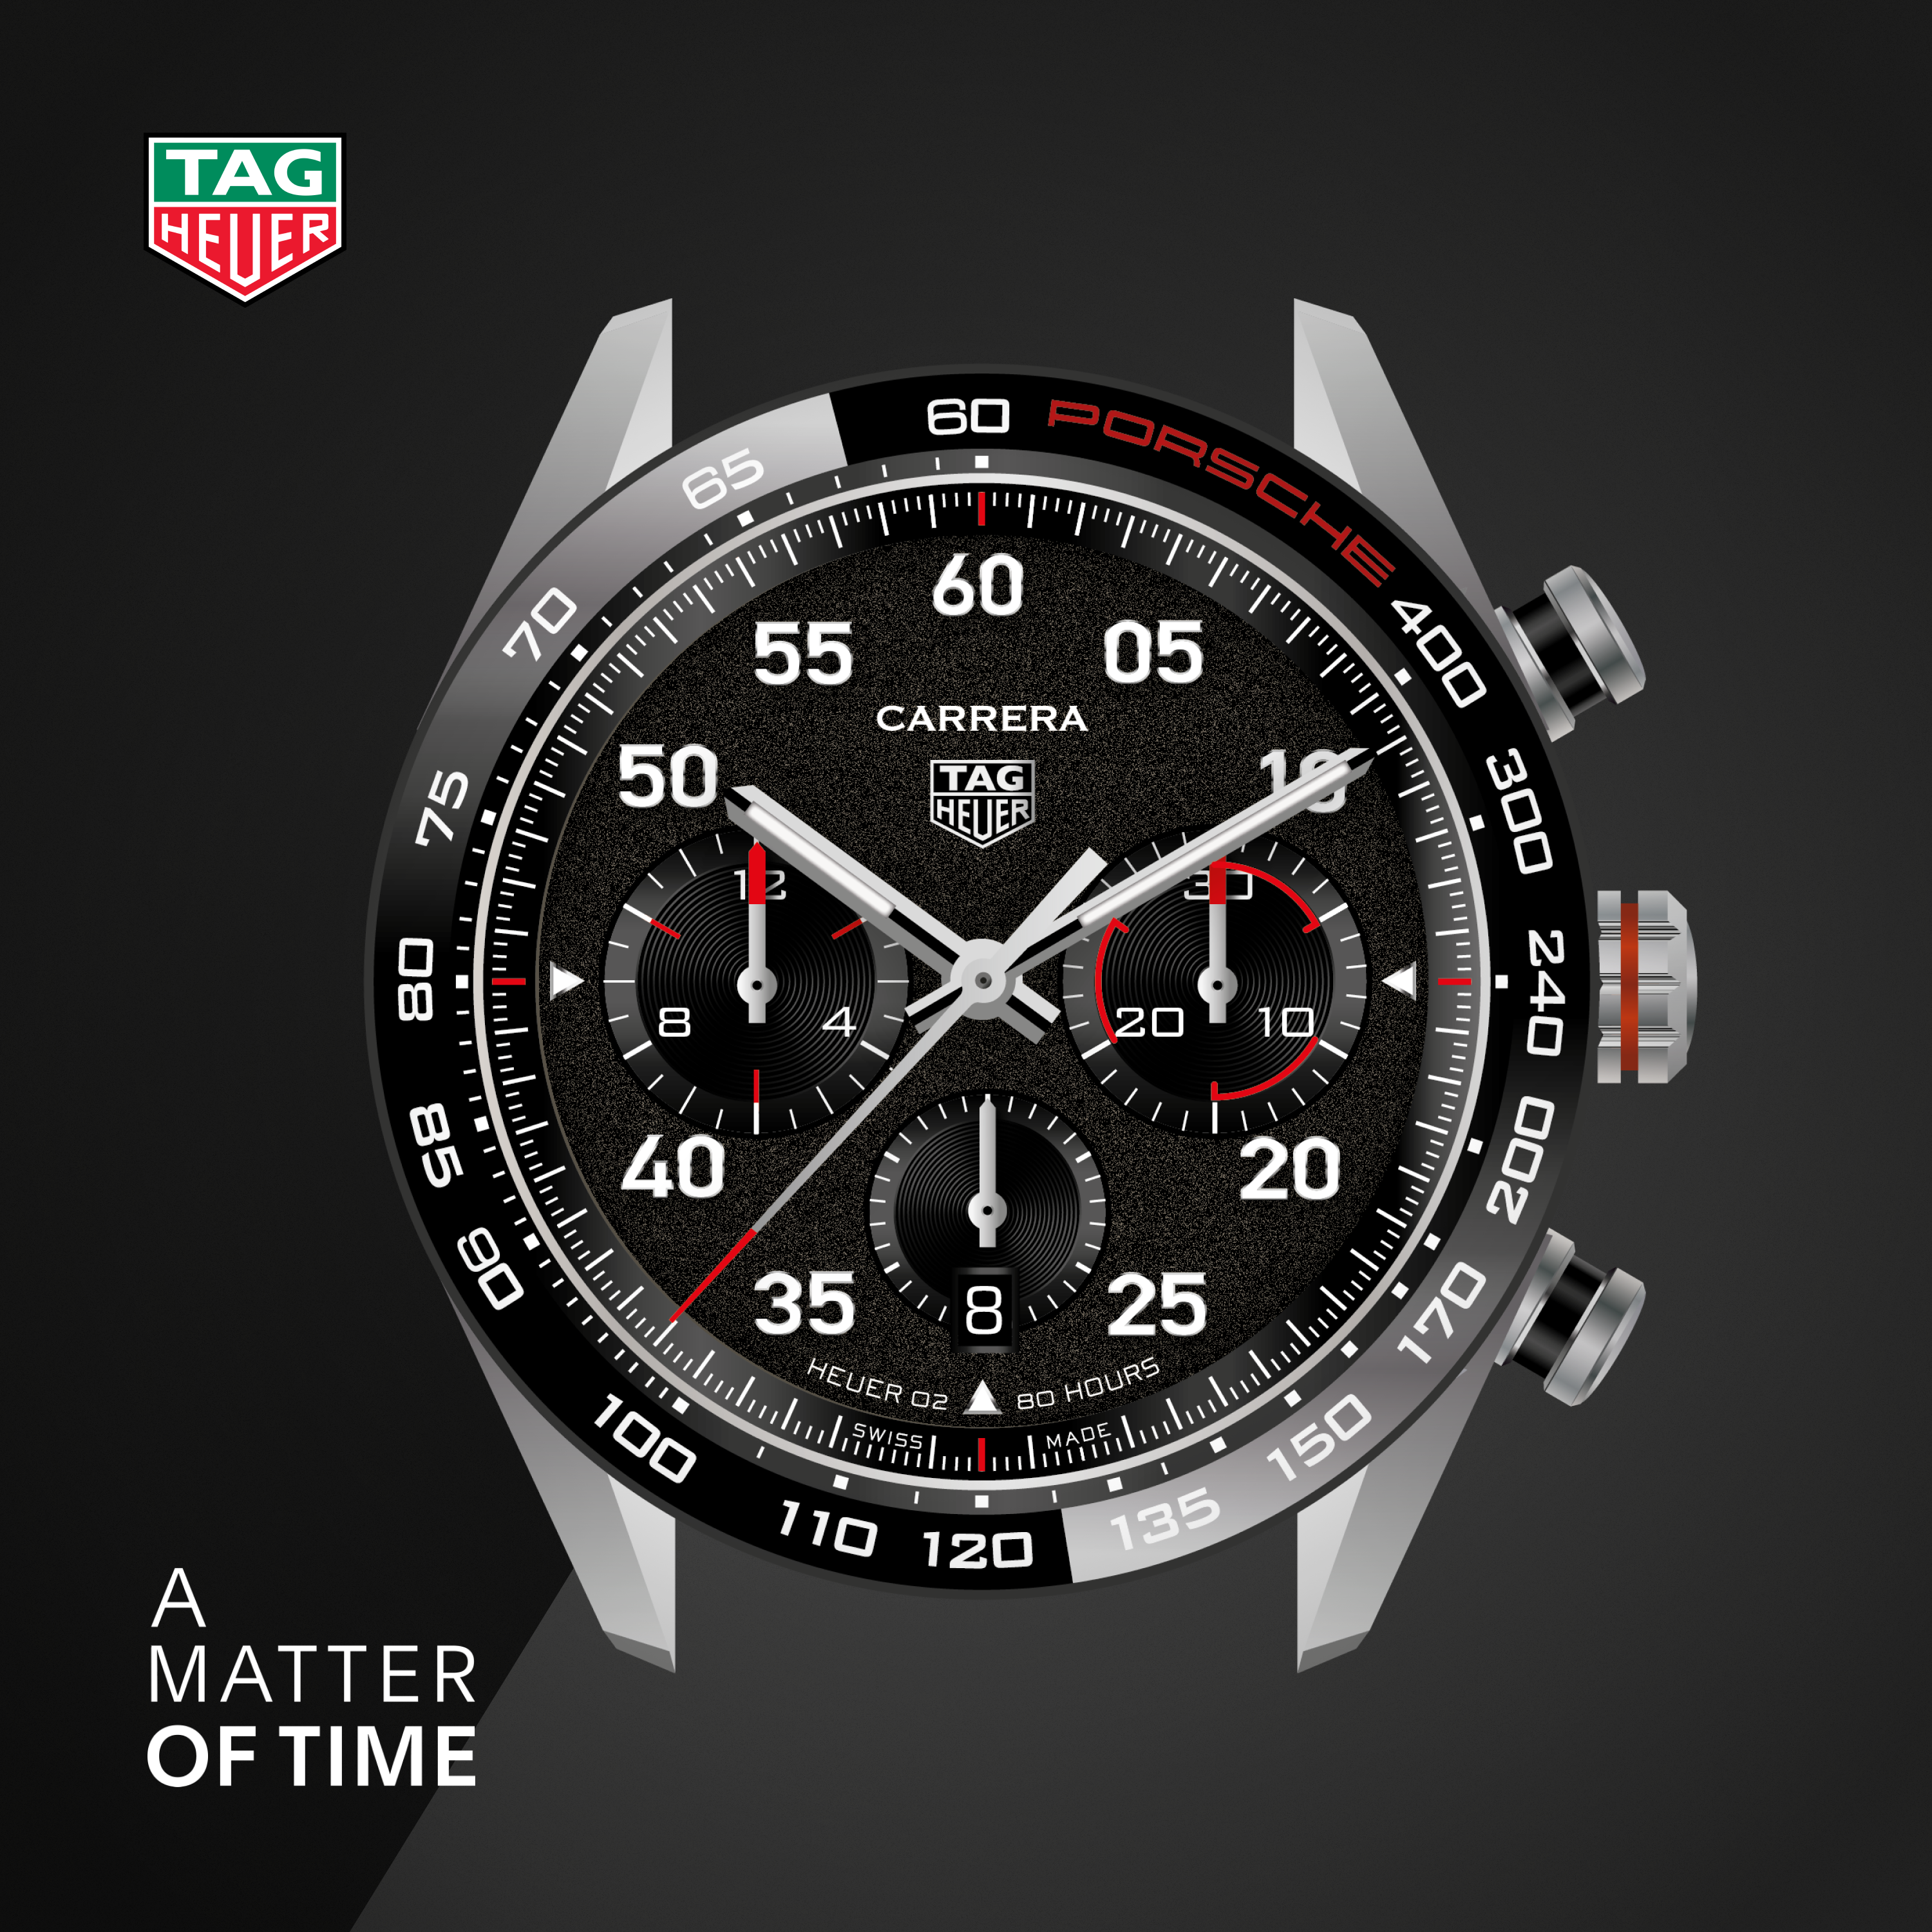 2021: TAG Heuer x Porsche - an alliance forged by innovation 